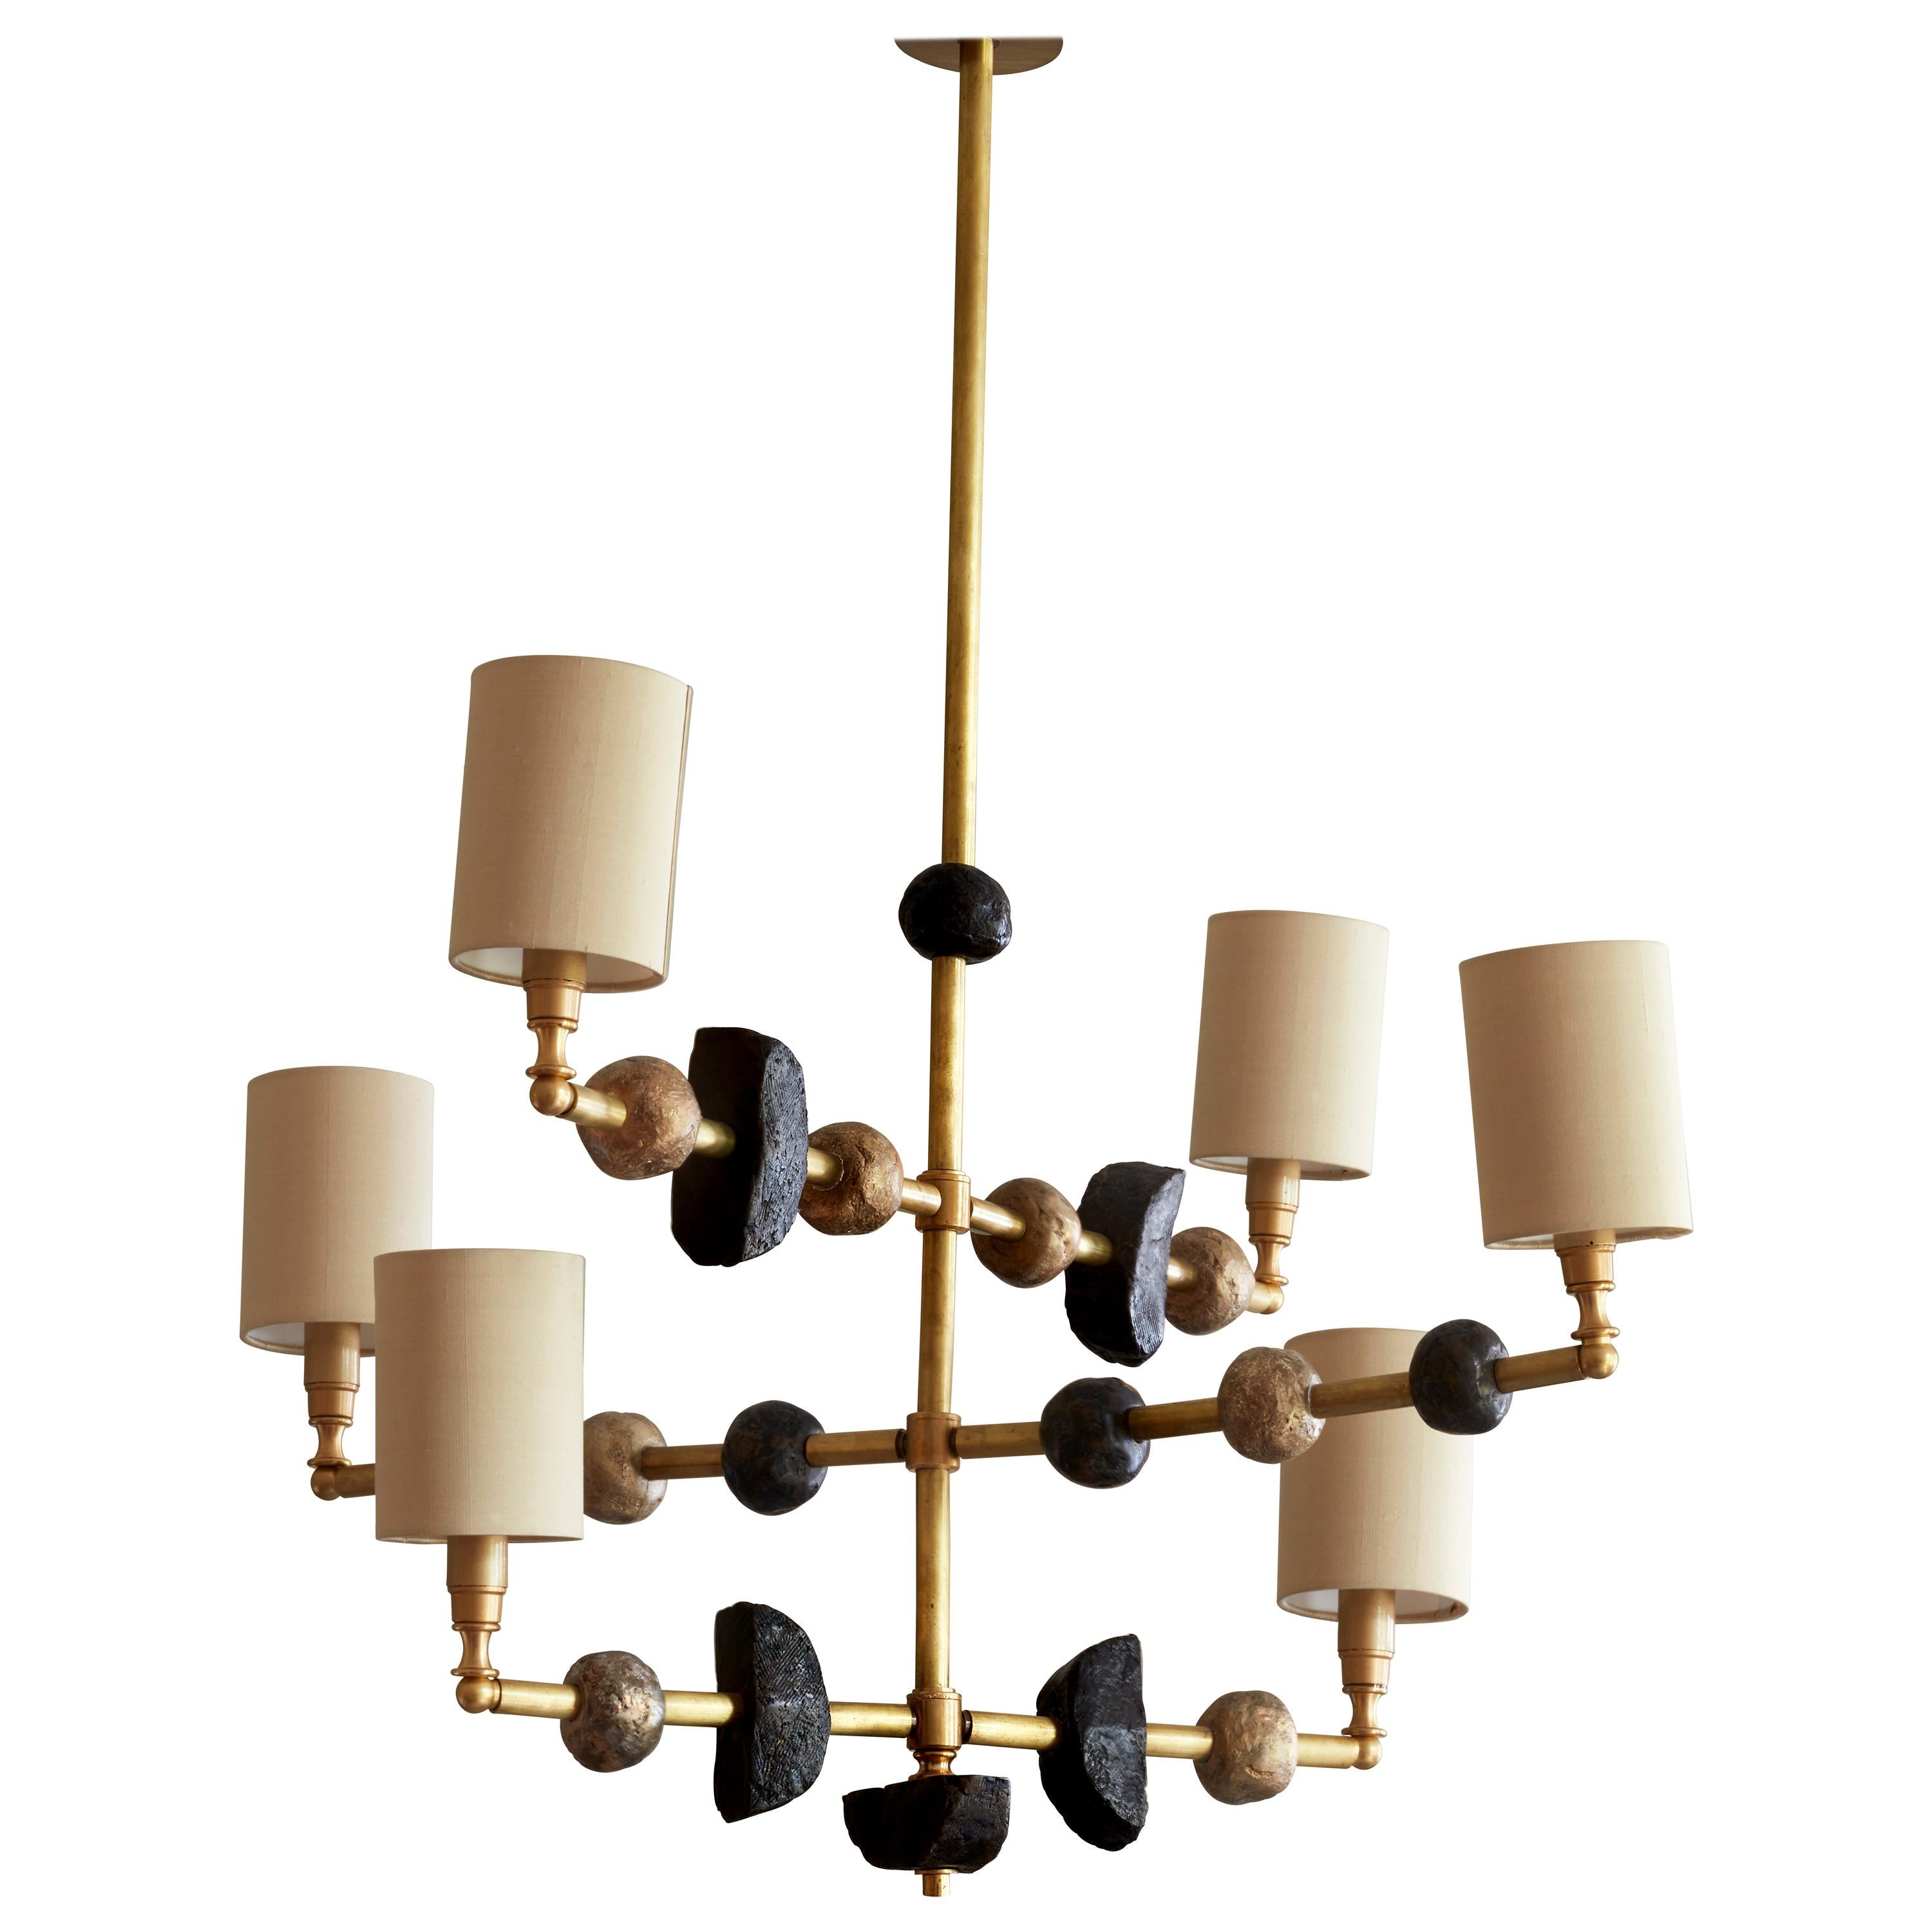 'Mayfair' Contemporary Chandelier, Brass with Sculpted Spheres by Margit Wittig For Sale